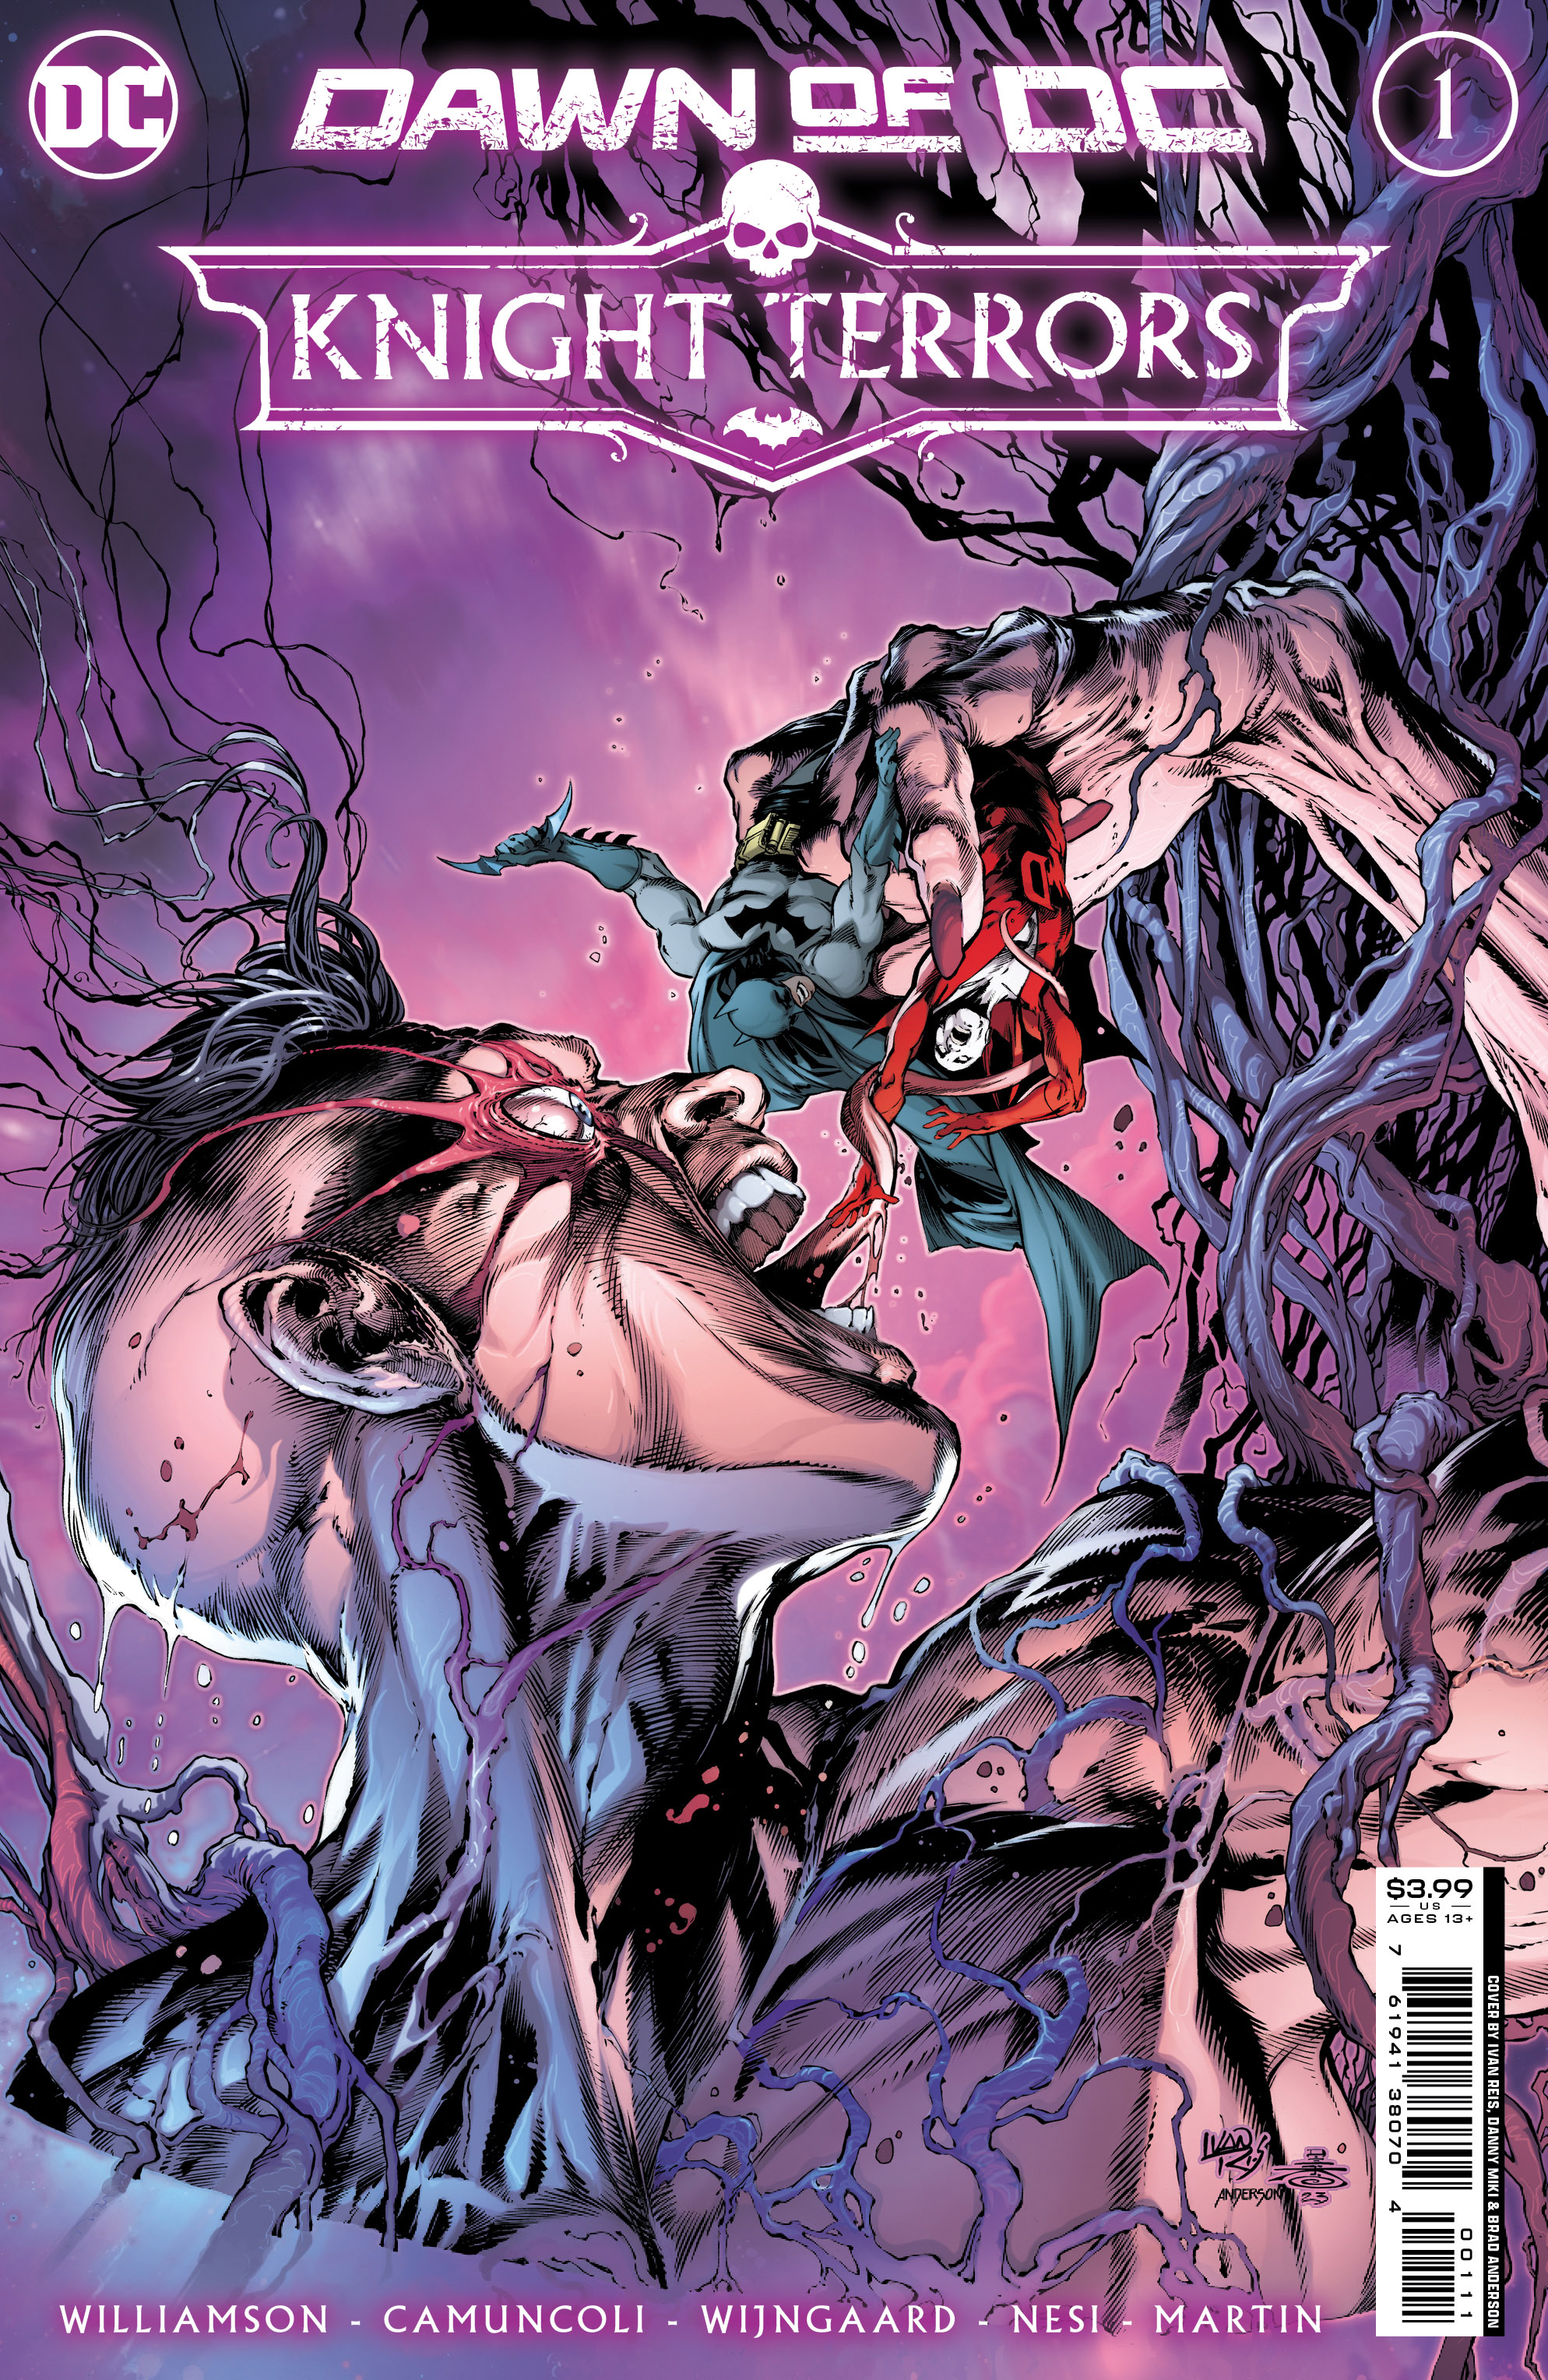 Knight Terrors #1 Cover A Ivan Reis & Danny Miki (Of 4)